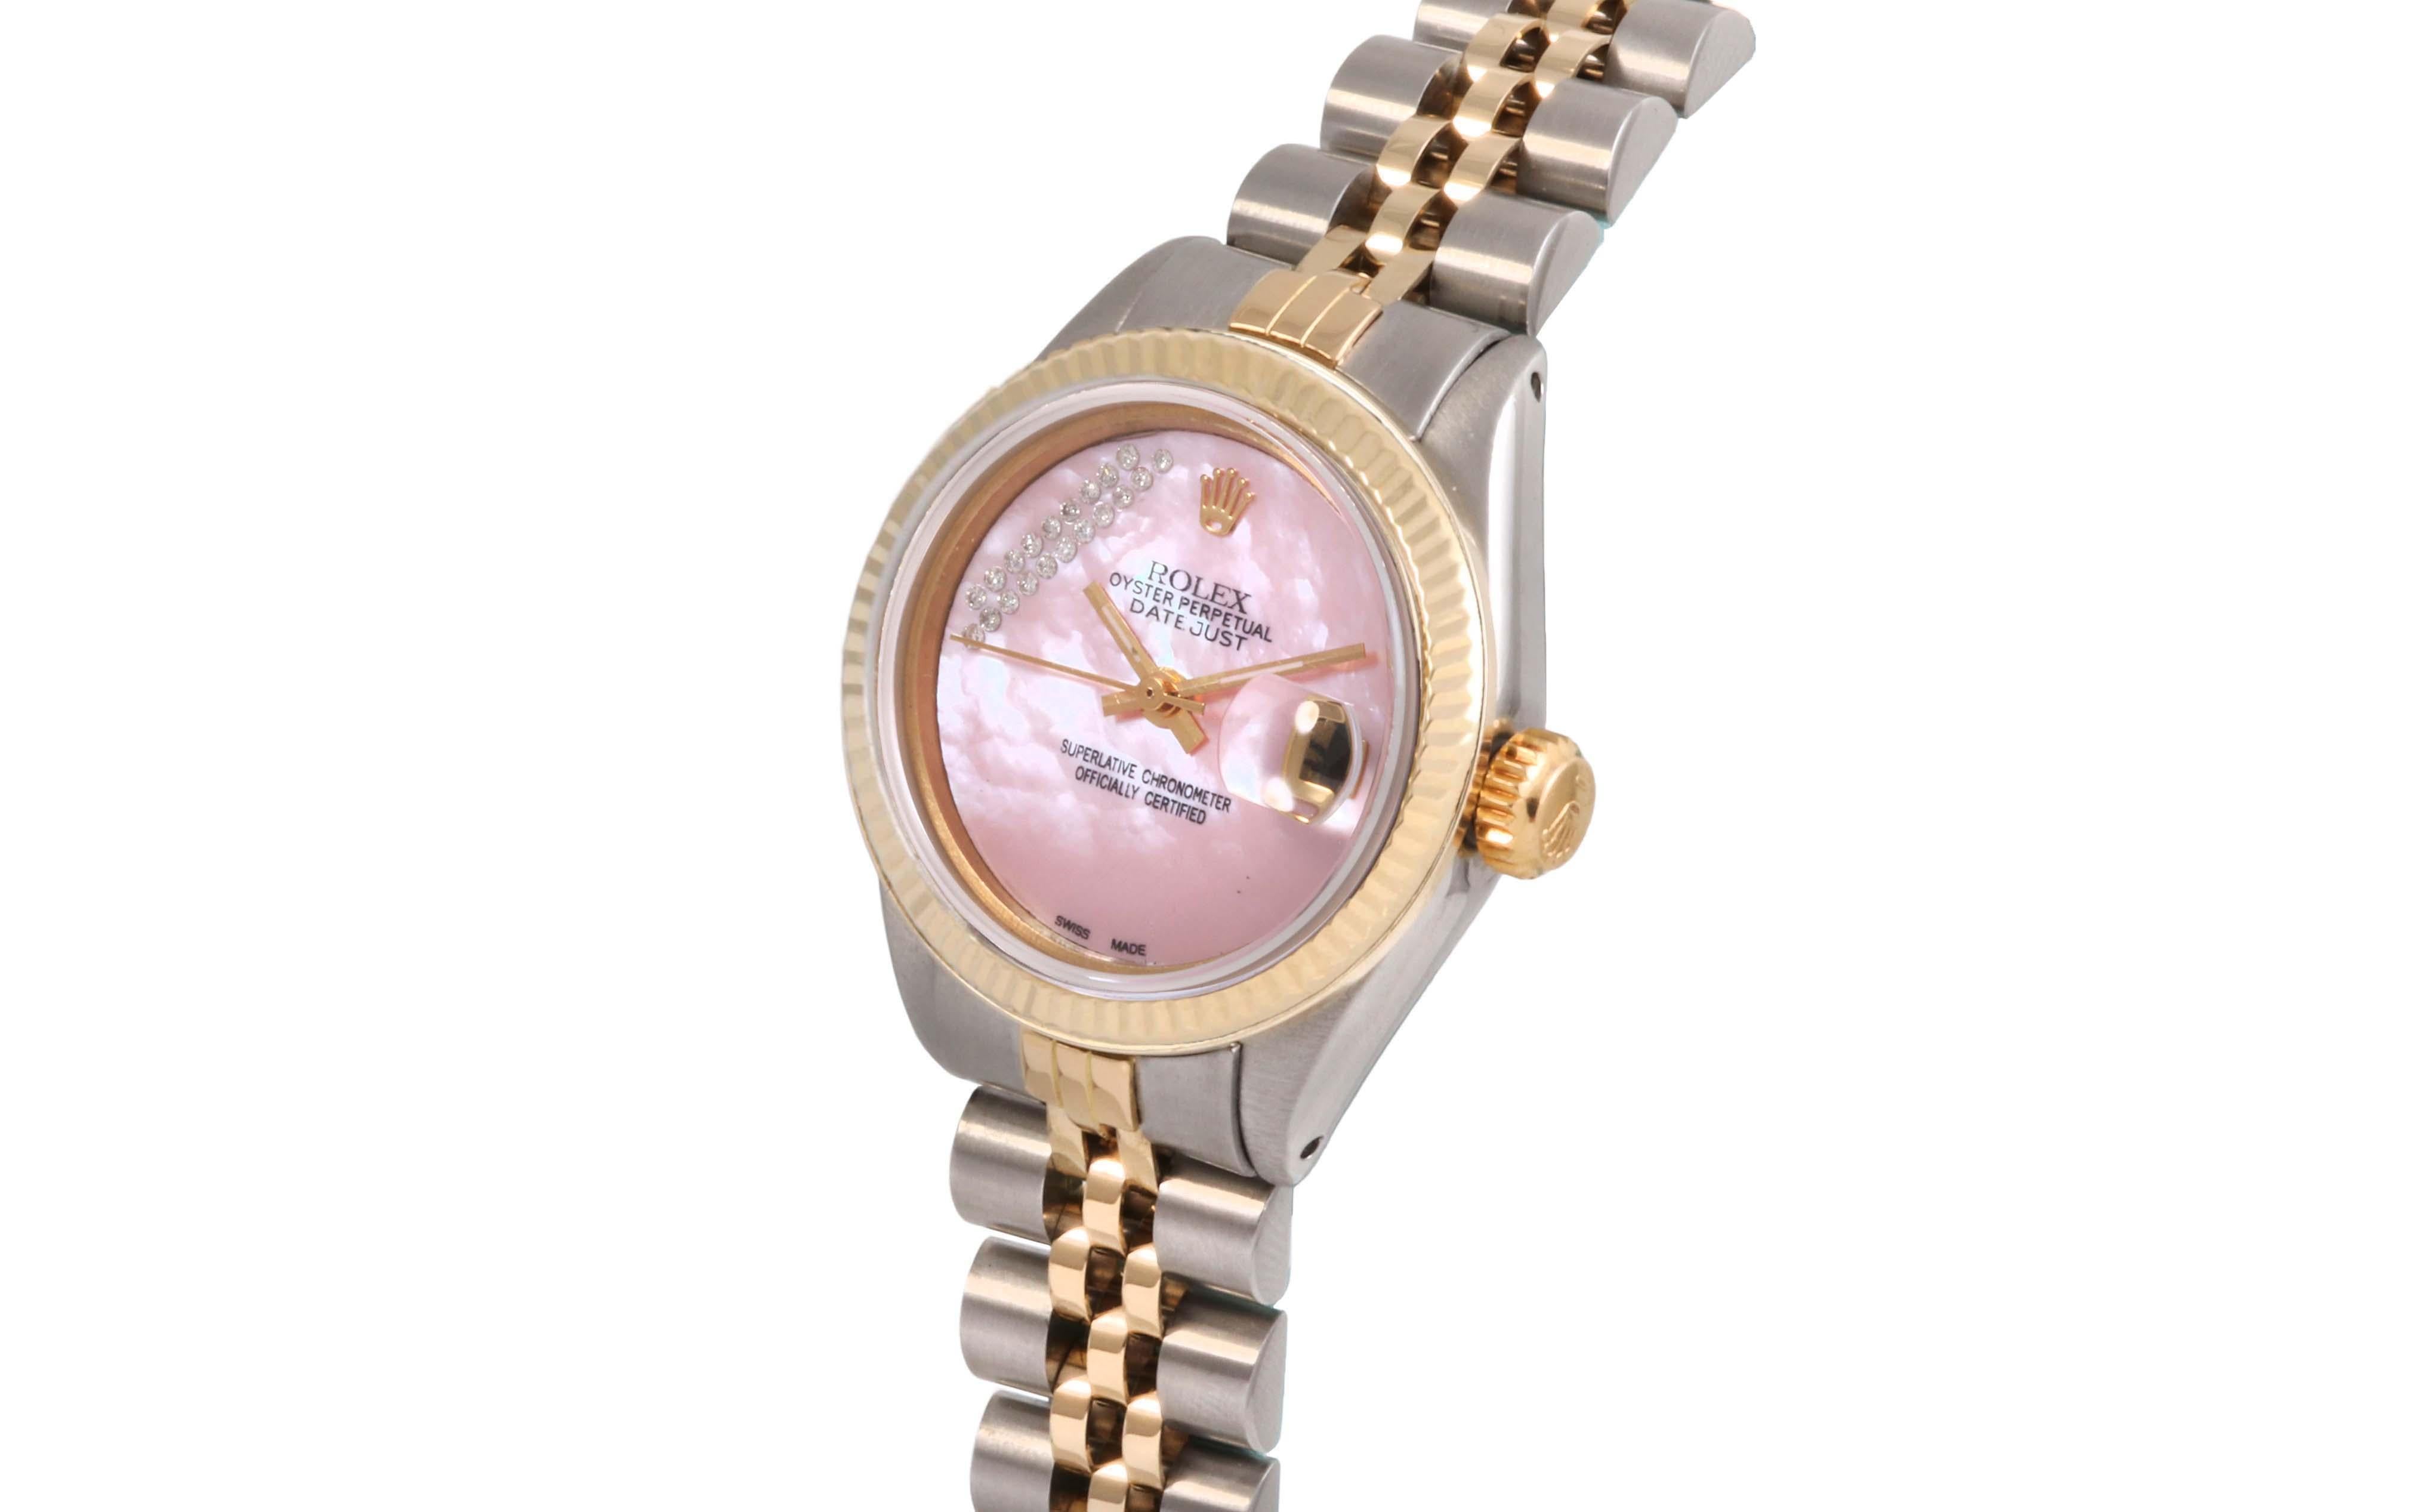 (Watch Description) 
Brand - Rolex
Gender - Ladies 
Model - 6917 Presidential
Metals - Yellow Solid Gold
Case size - 26mm
Bezel - Yellow gold Fluted
Crystal - Acrylic
Movement - Automatic Cal.2035
Dial - Refinished Pink MOP Diamond
Wrist band -